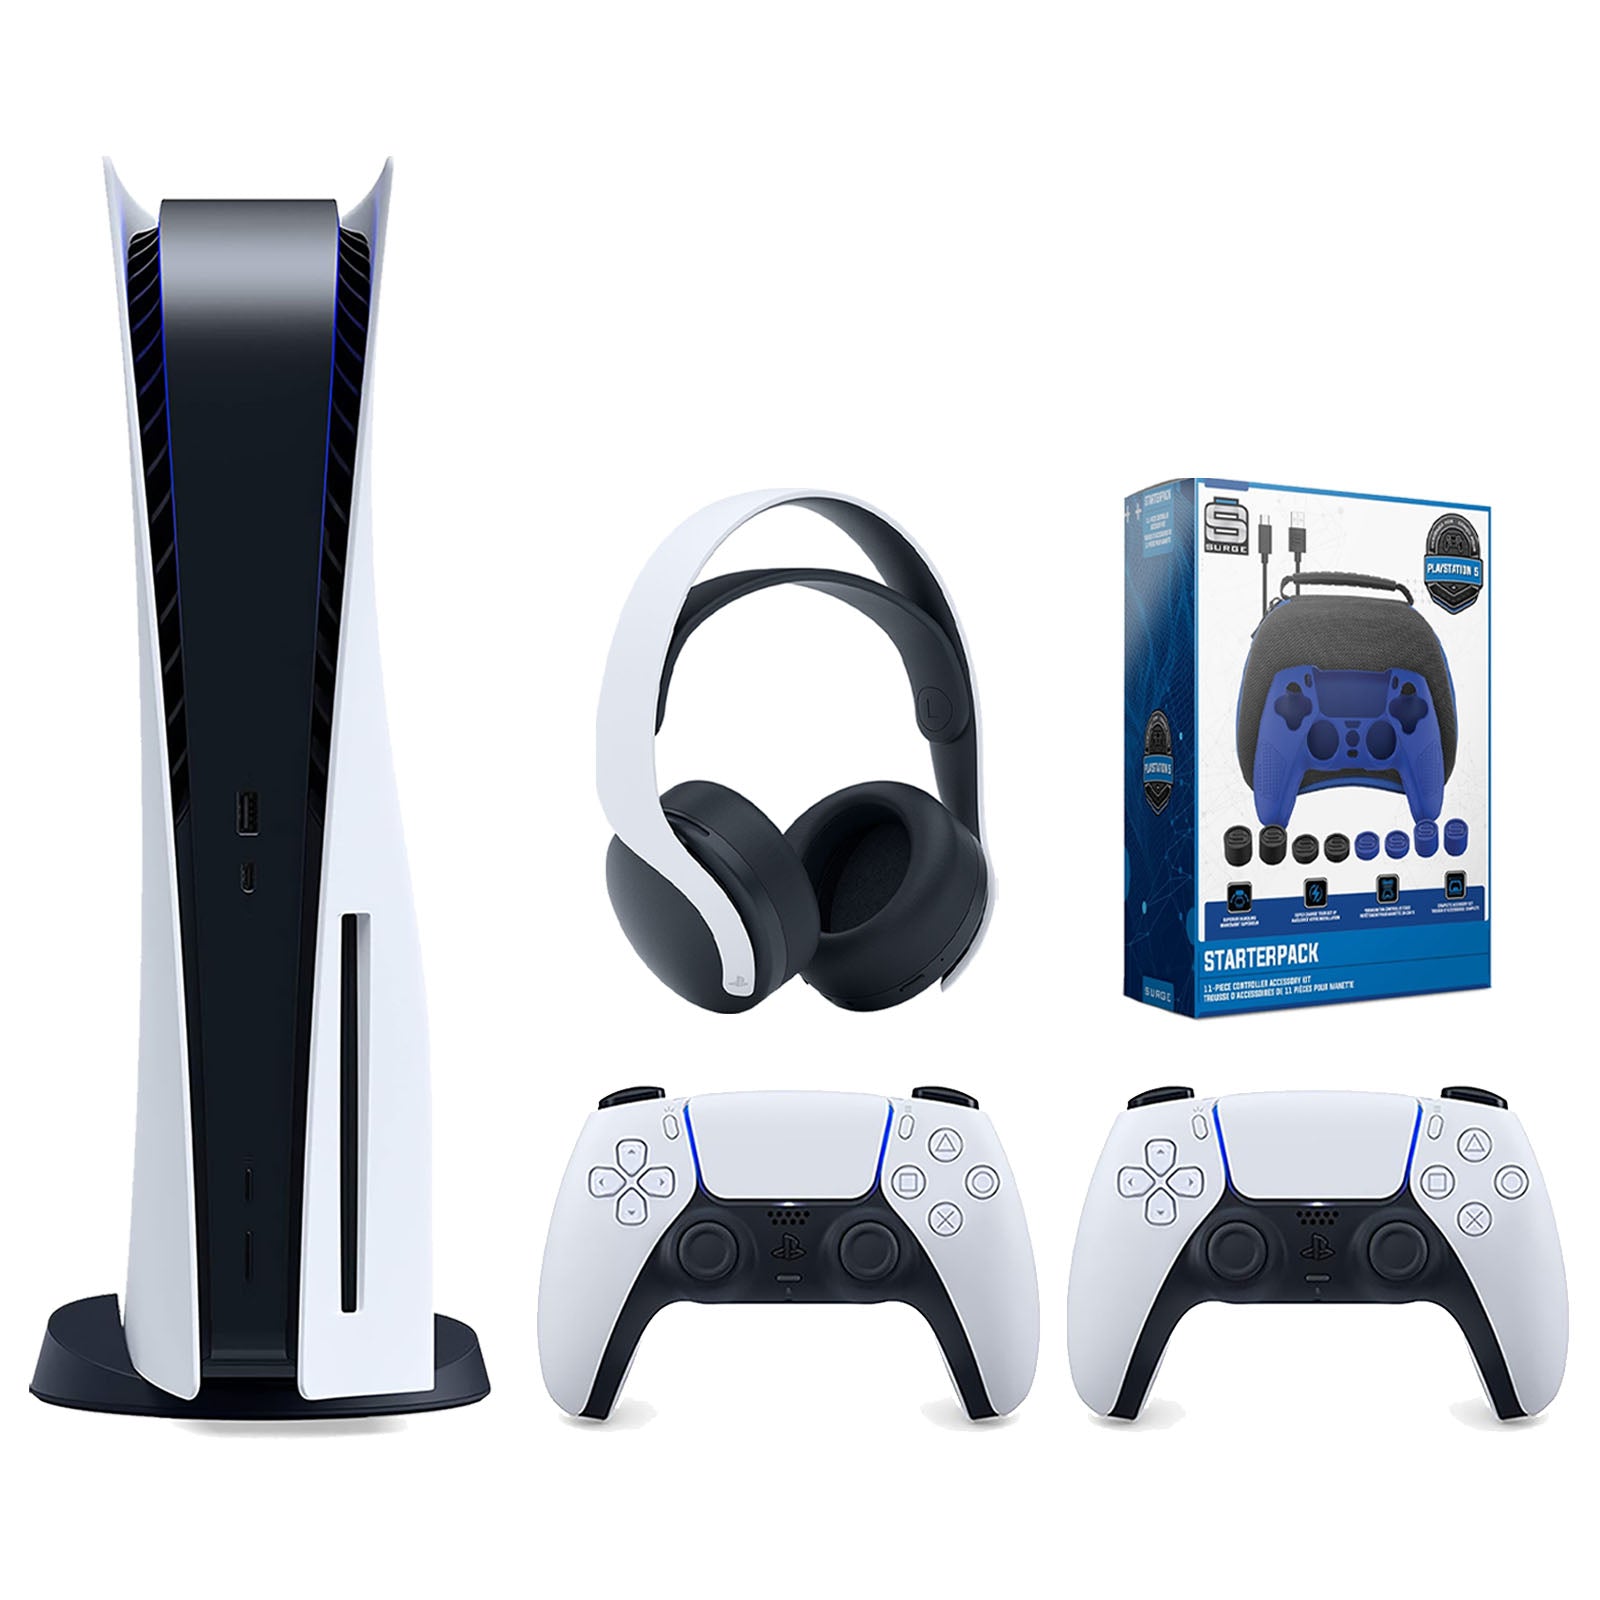 Sony Playstation 5 Disc Version Console with Extra White Controller, White PULSE 3D Headset and Surge Pro Gamer Starter Pack 11-Piece Accessory Bundle - Pro-Distributing